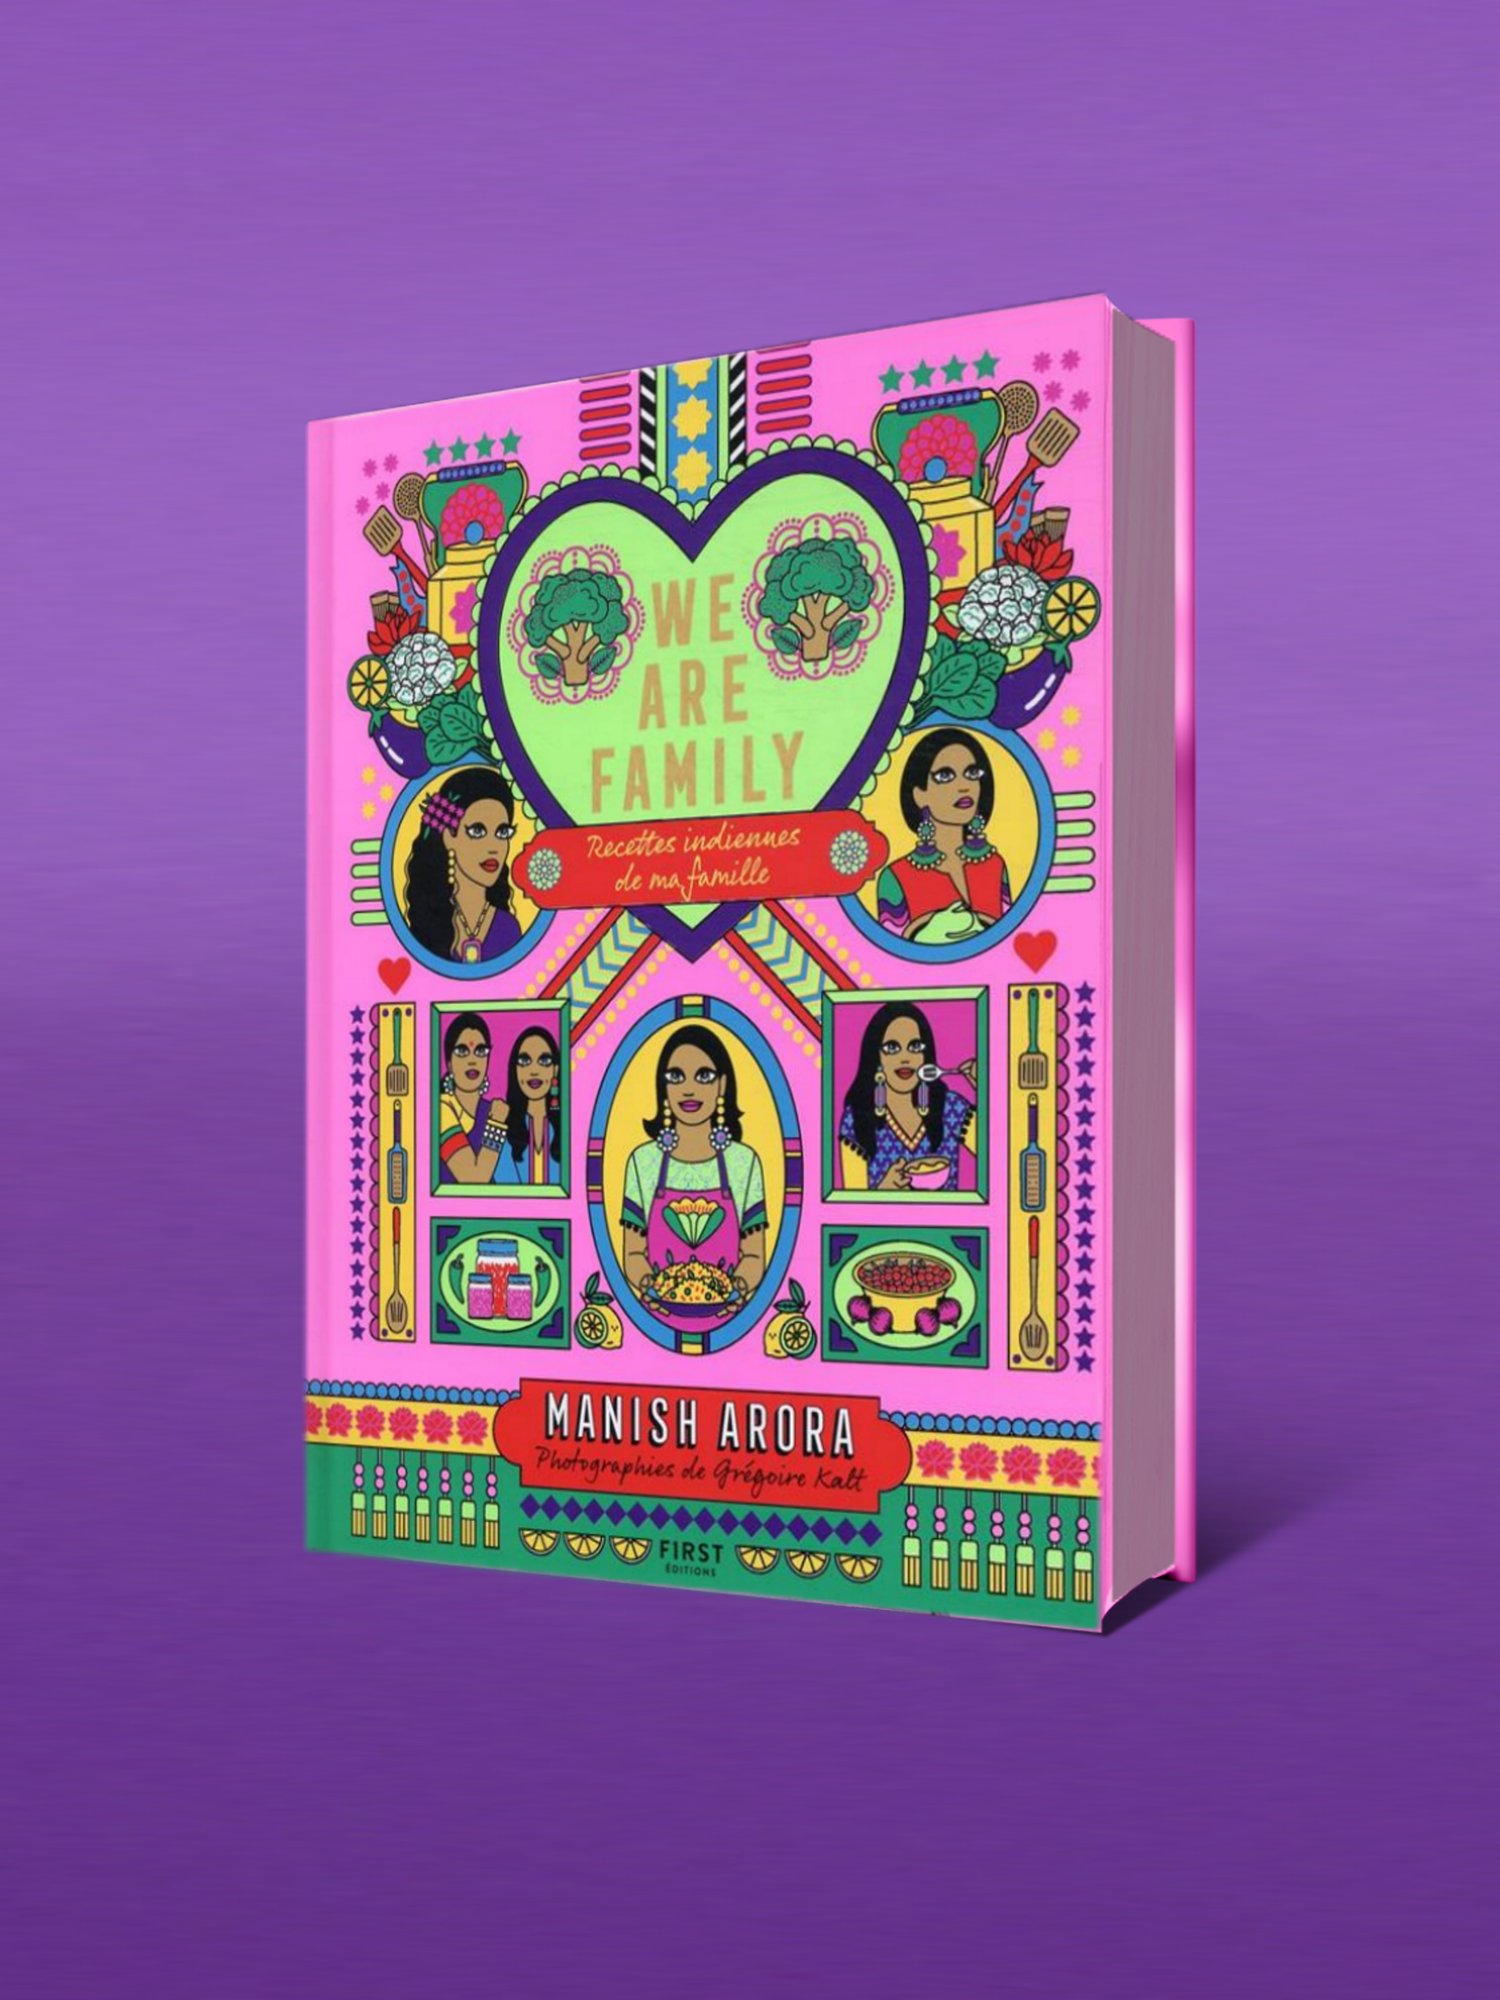 Image of We Are Family: Recettes Indiennes De Ma Famille by Manish Arora (Hardcover Book)